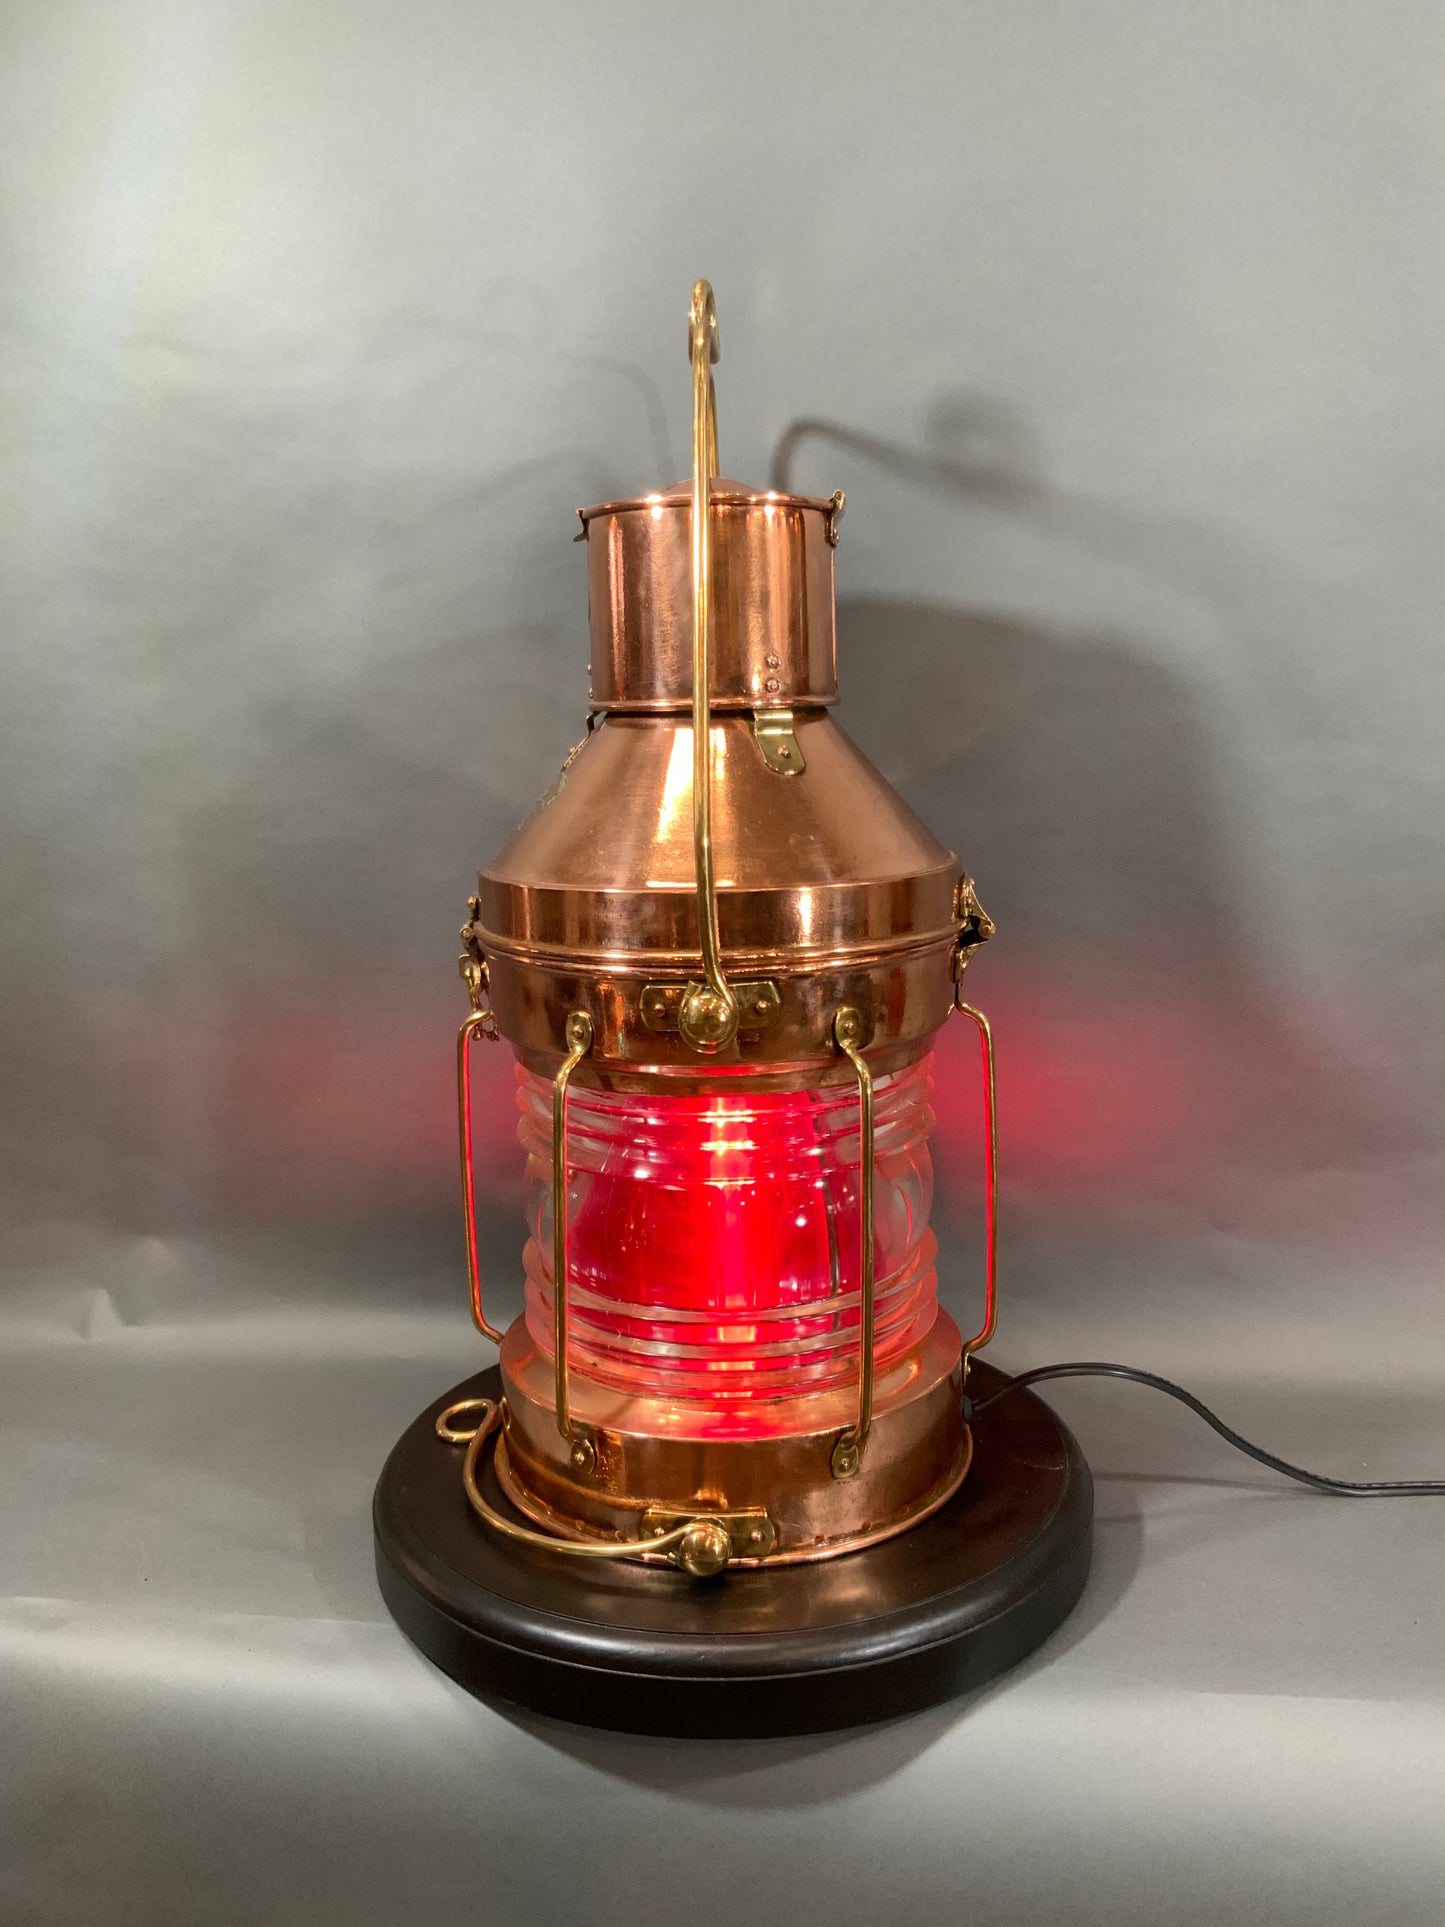 Solid Copper Ship’s Anchor Lantern by Meteorite of England - Lannan Gallery